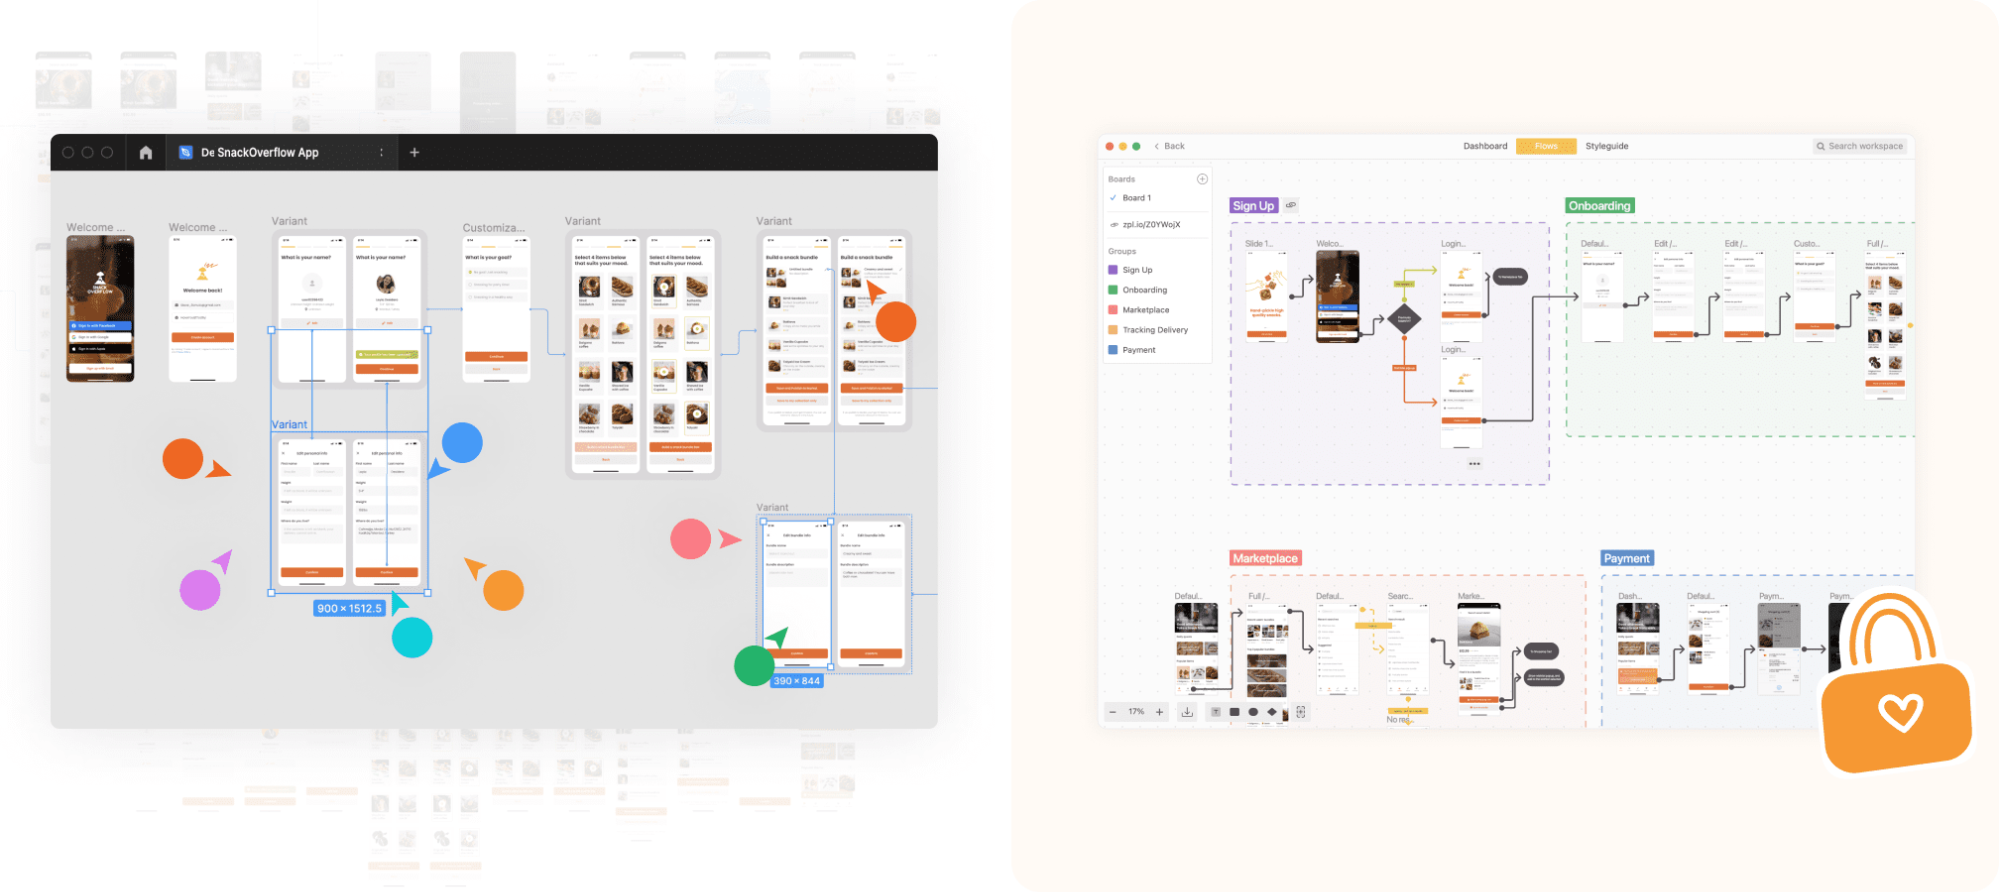 In Figma, designs keep changing, while screens in Zeplin are locked